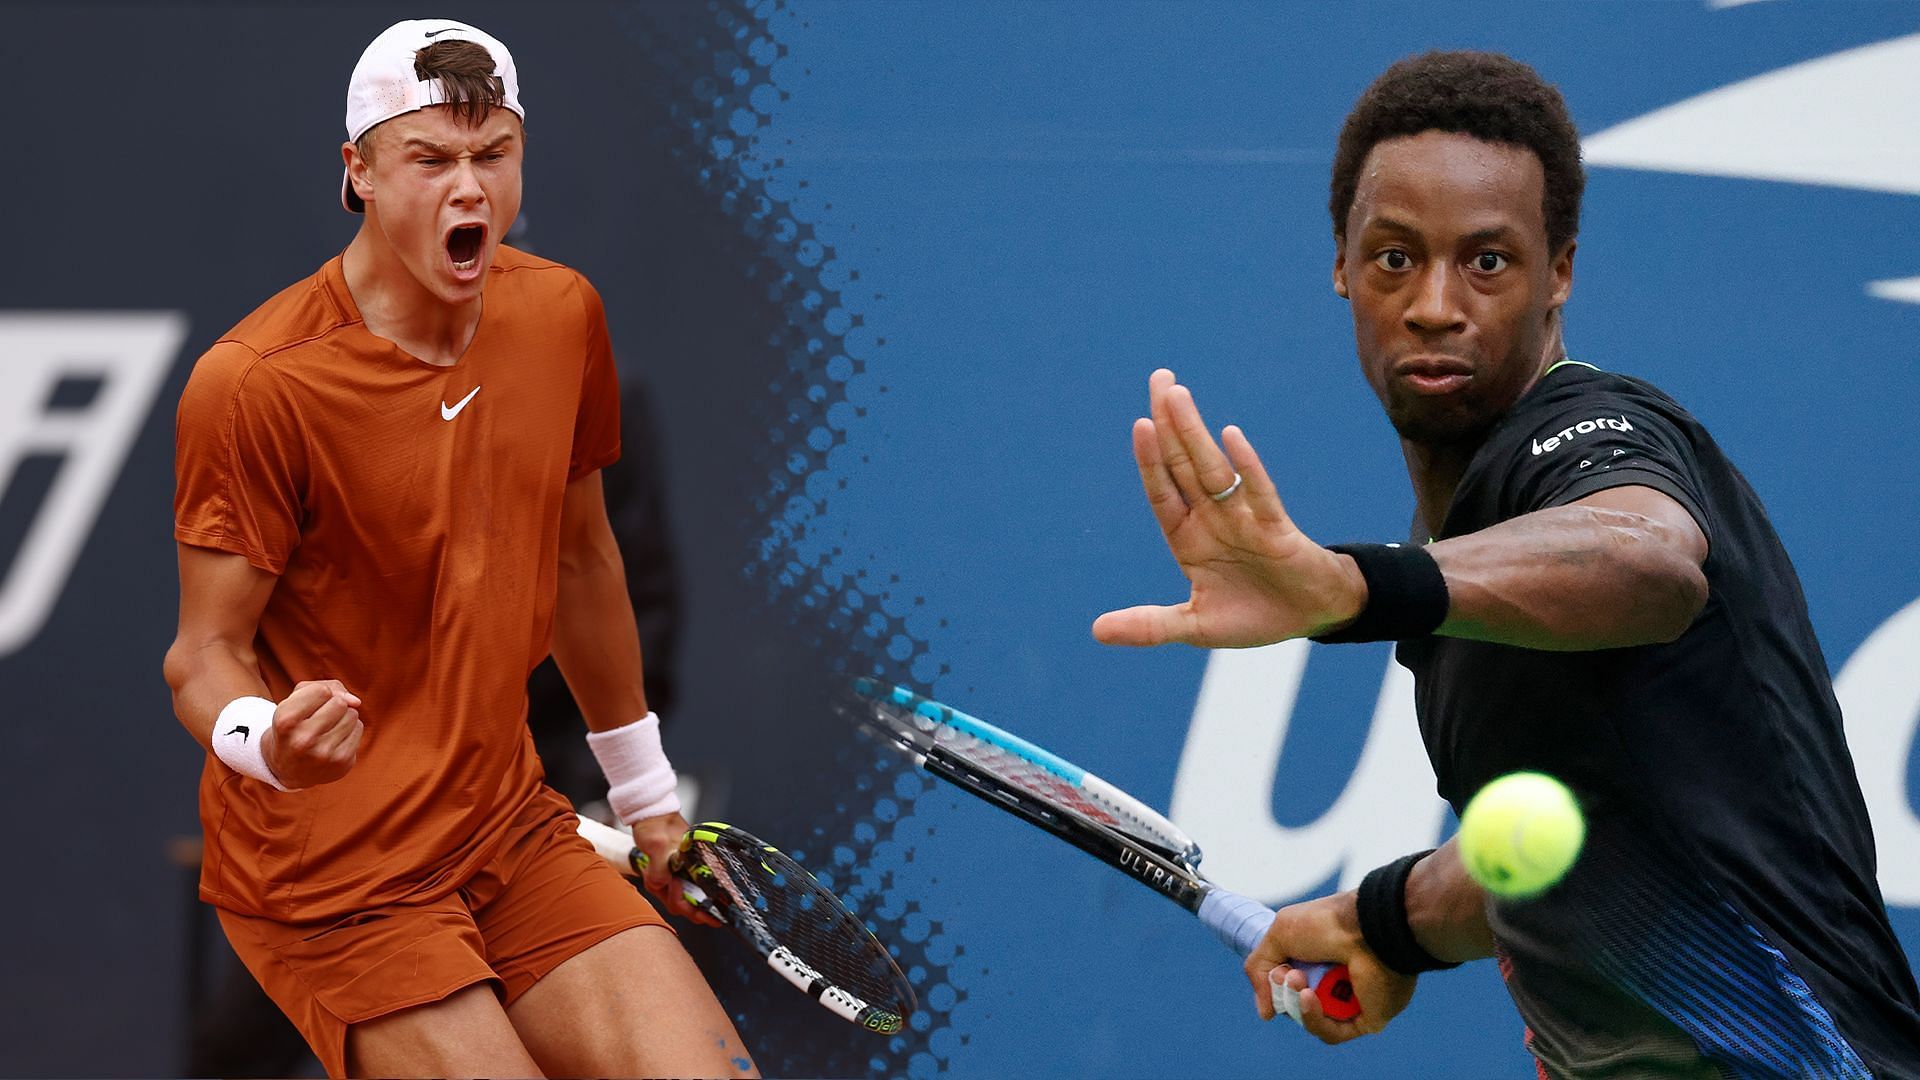 Holger Rune (L) and Gael Monfils (R)